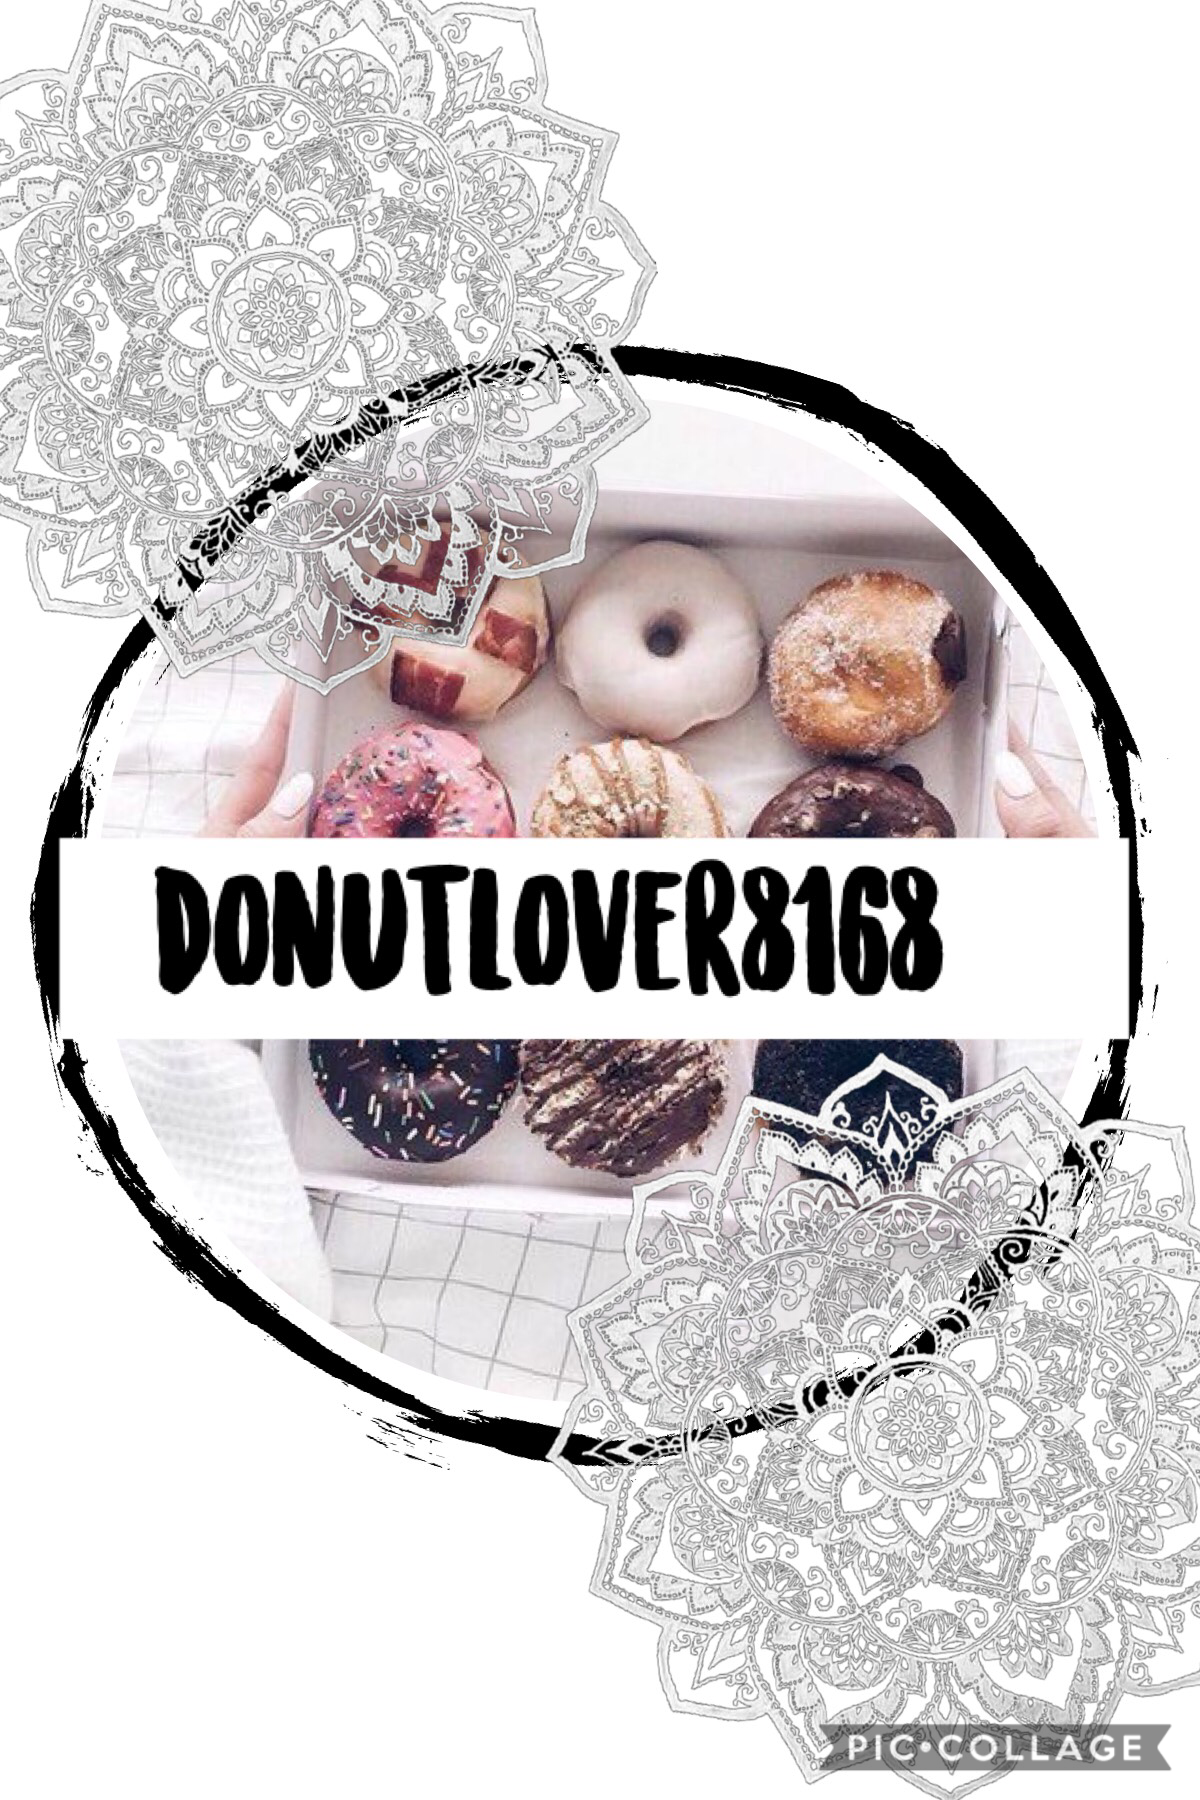 Donutlover8168 icon xx sorry couldn’t cut a circle xx